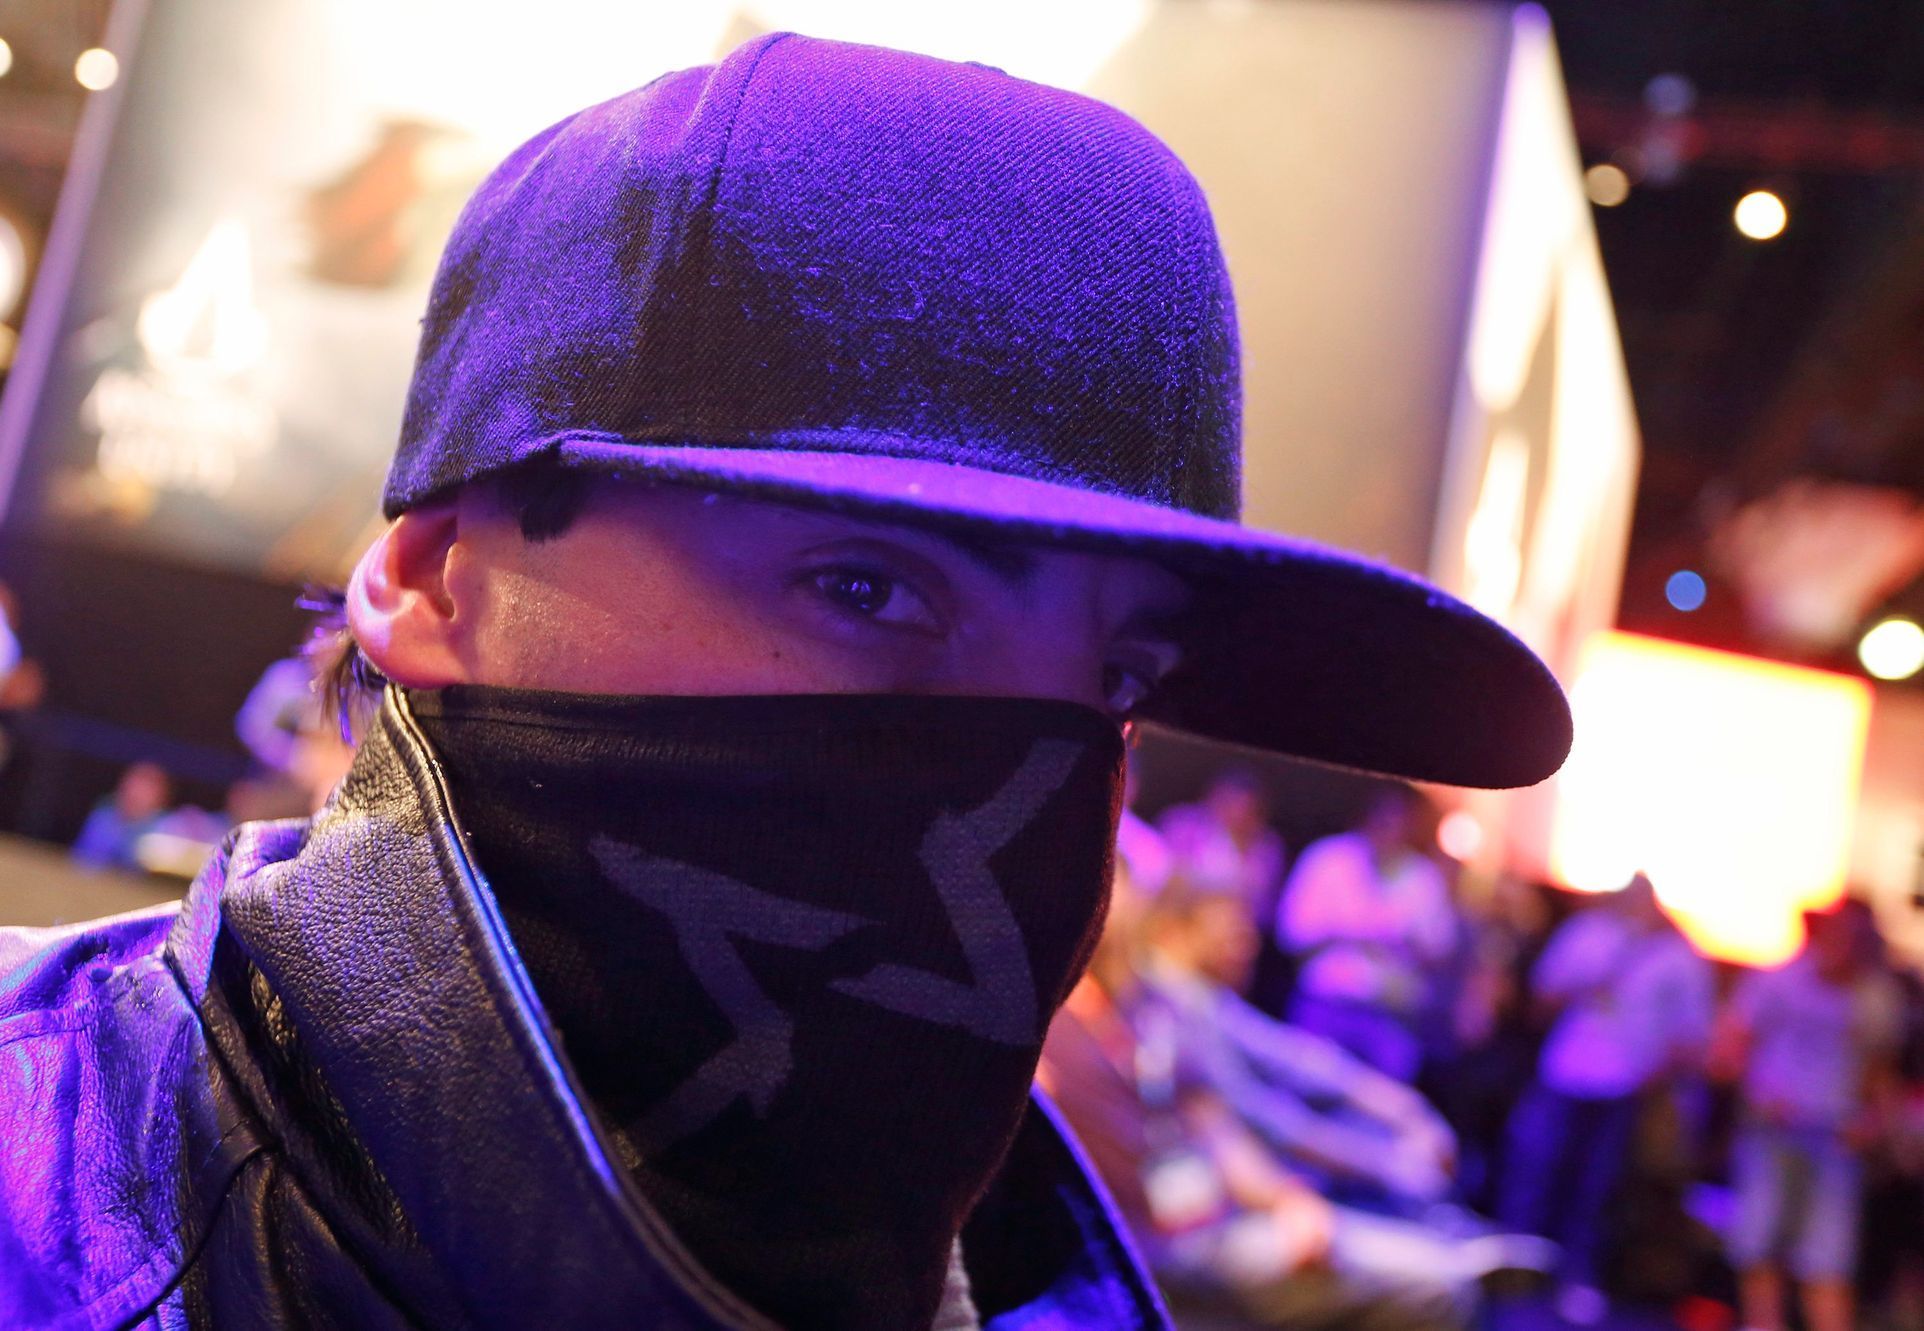 A man dressed as a character from the video game &quot;Watch Dogs&quot; poses at the Ubisoft booth during the 2014 Electronic Entertainment Expo, known as E3, in Los Angeles